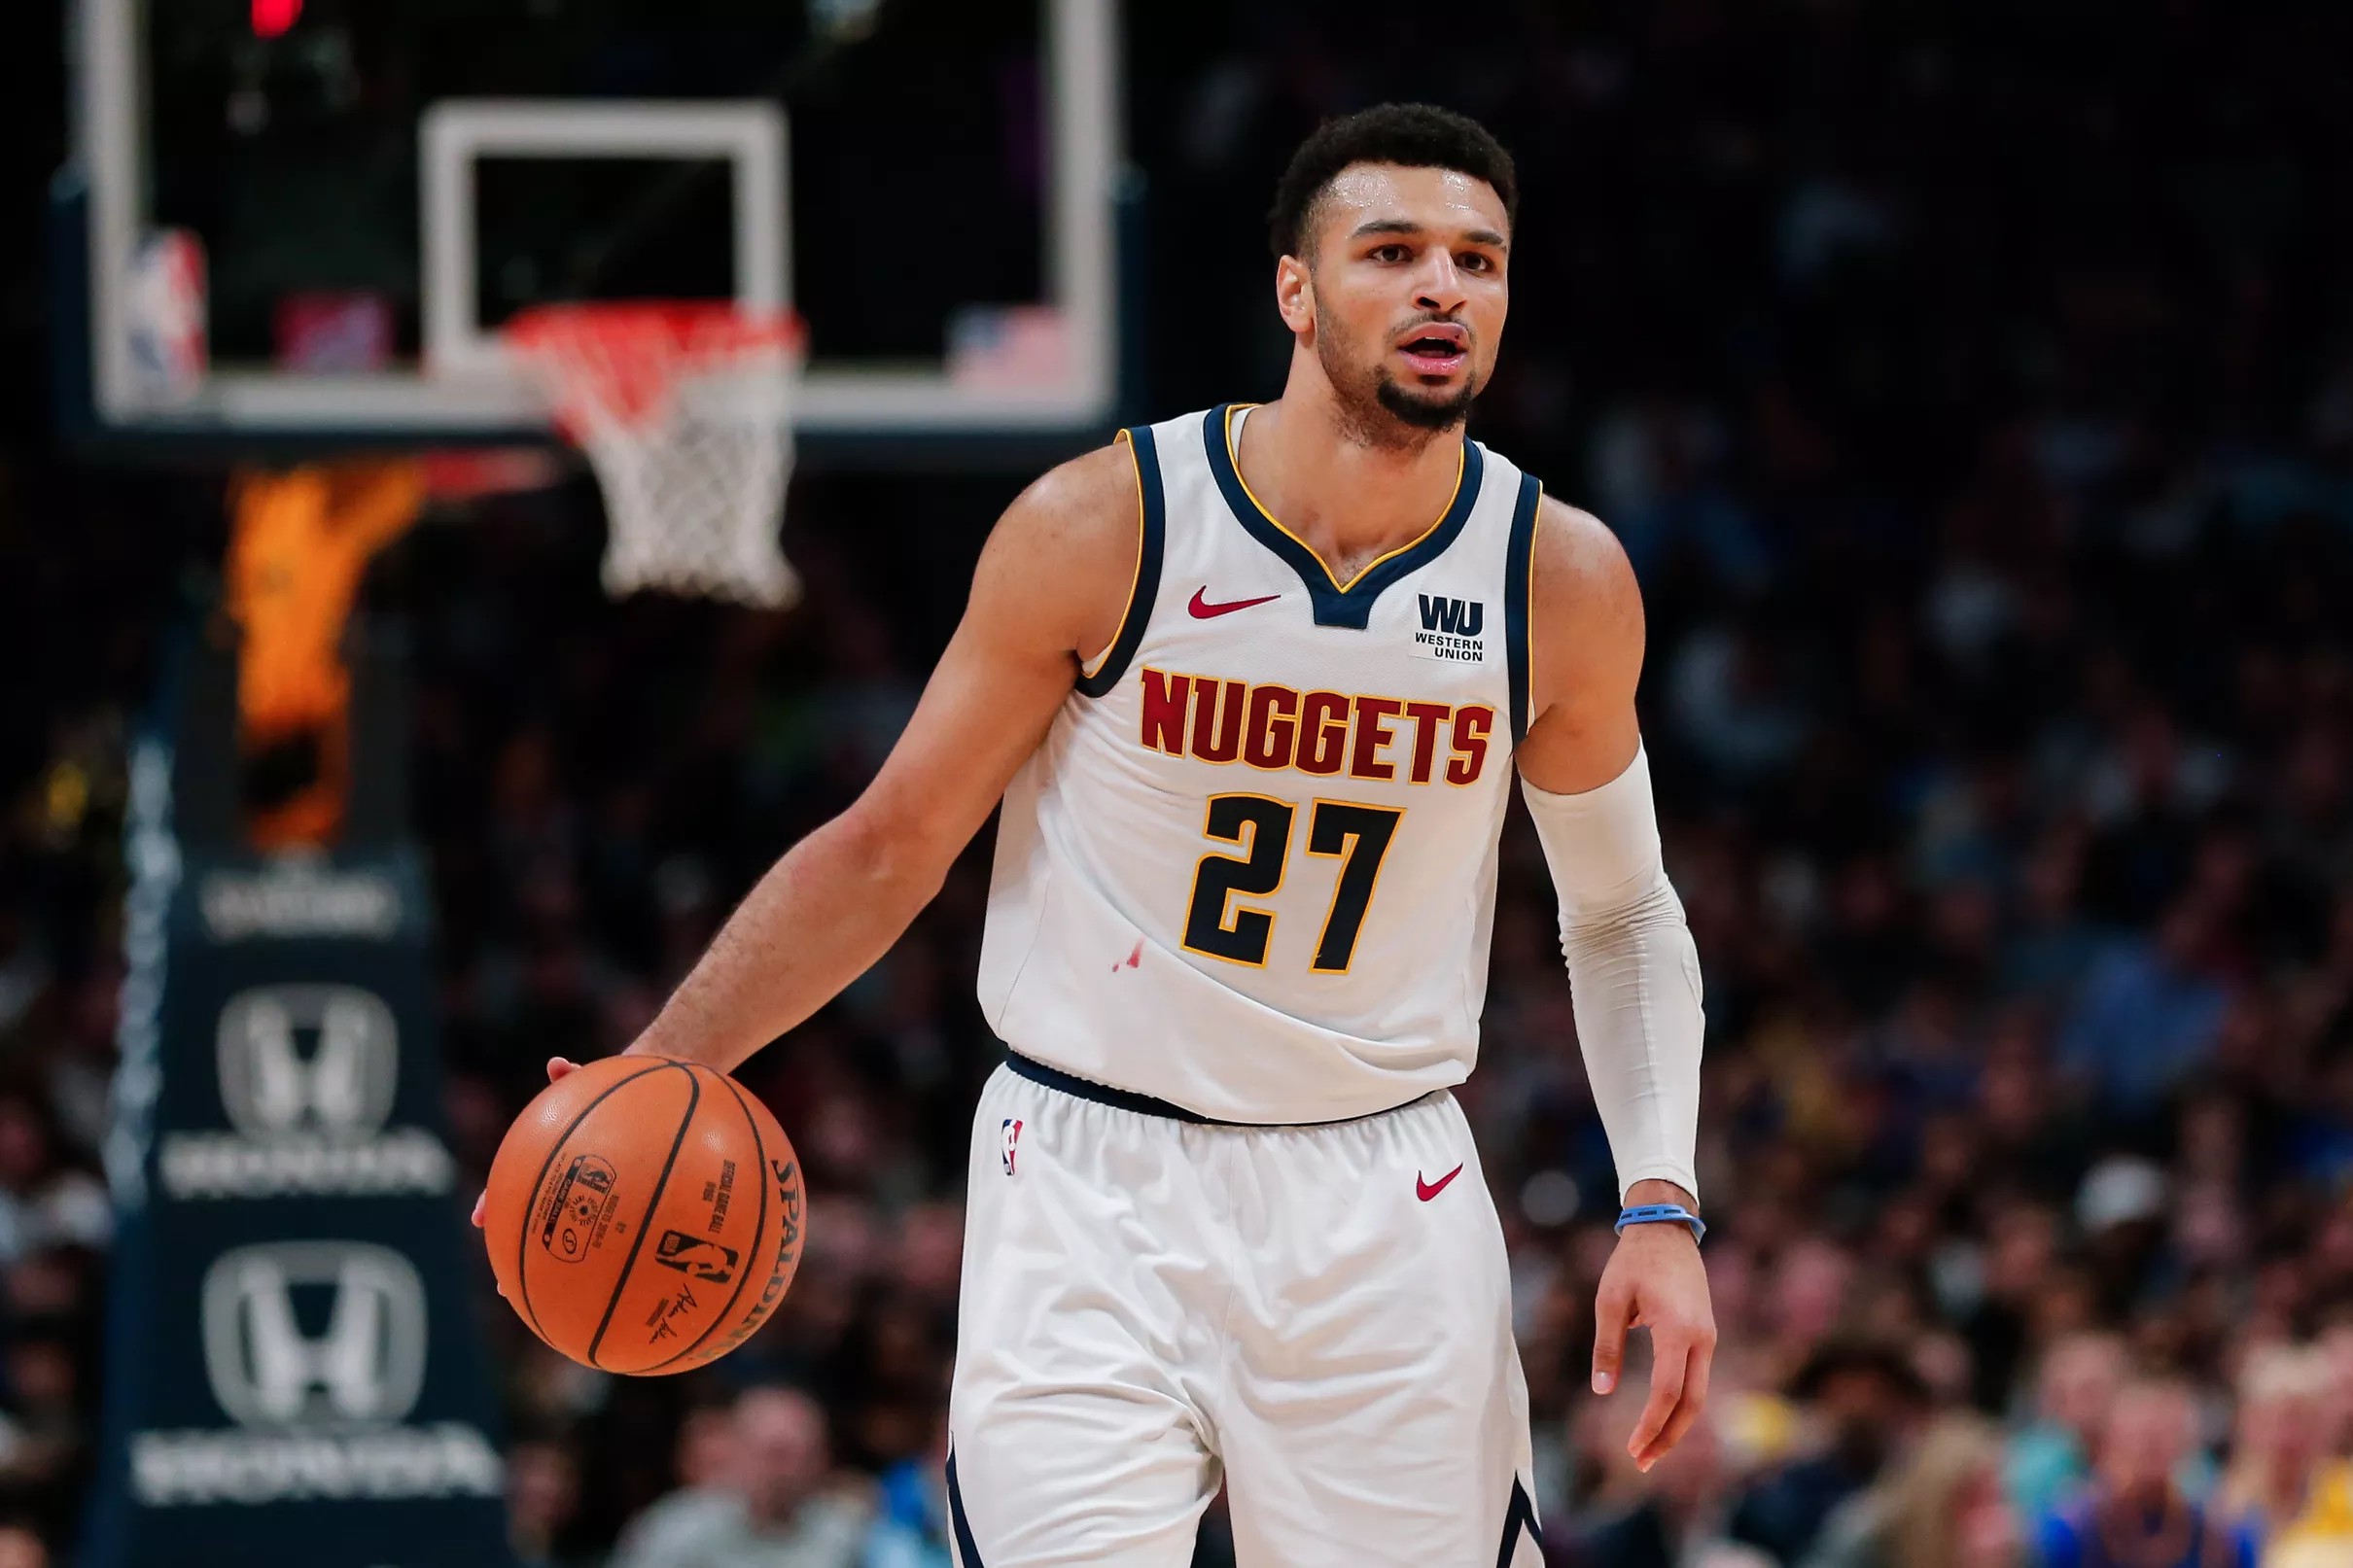 An excellent story on the road for Jamal Murray to get to the NBA